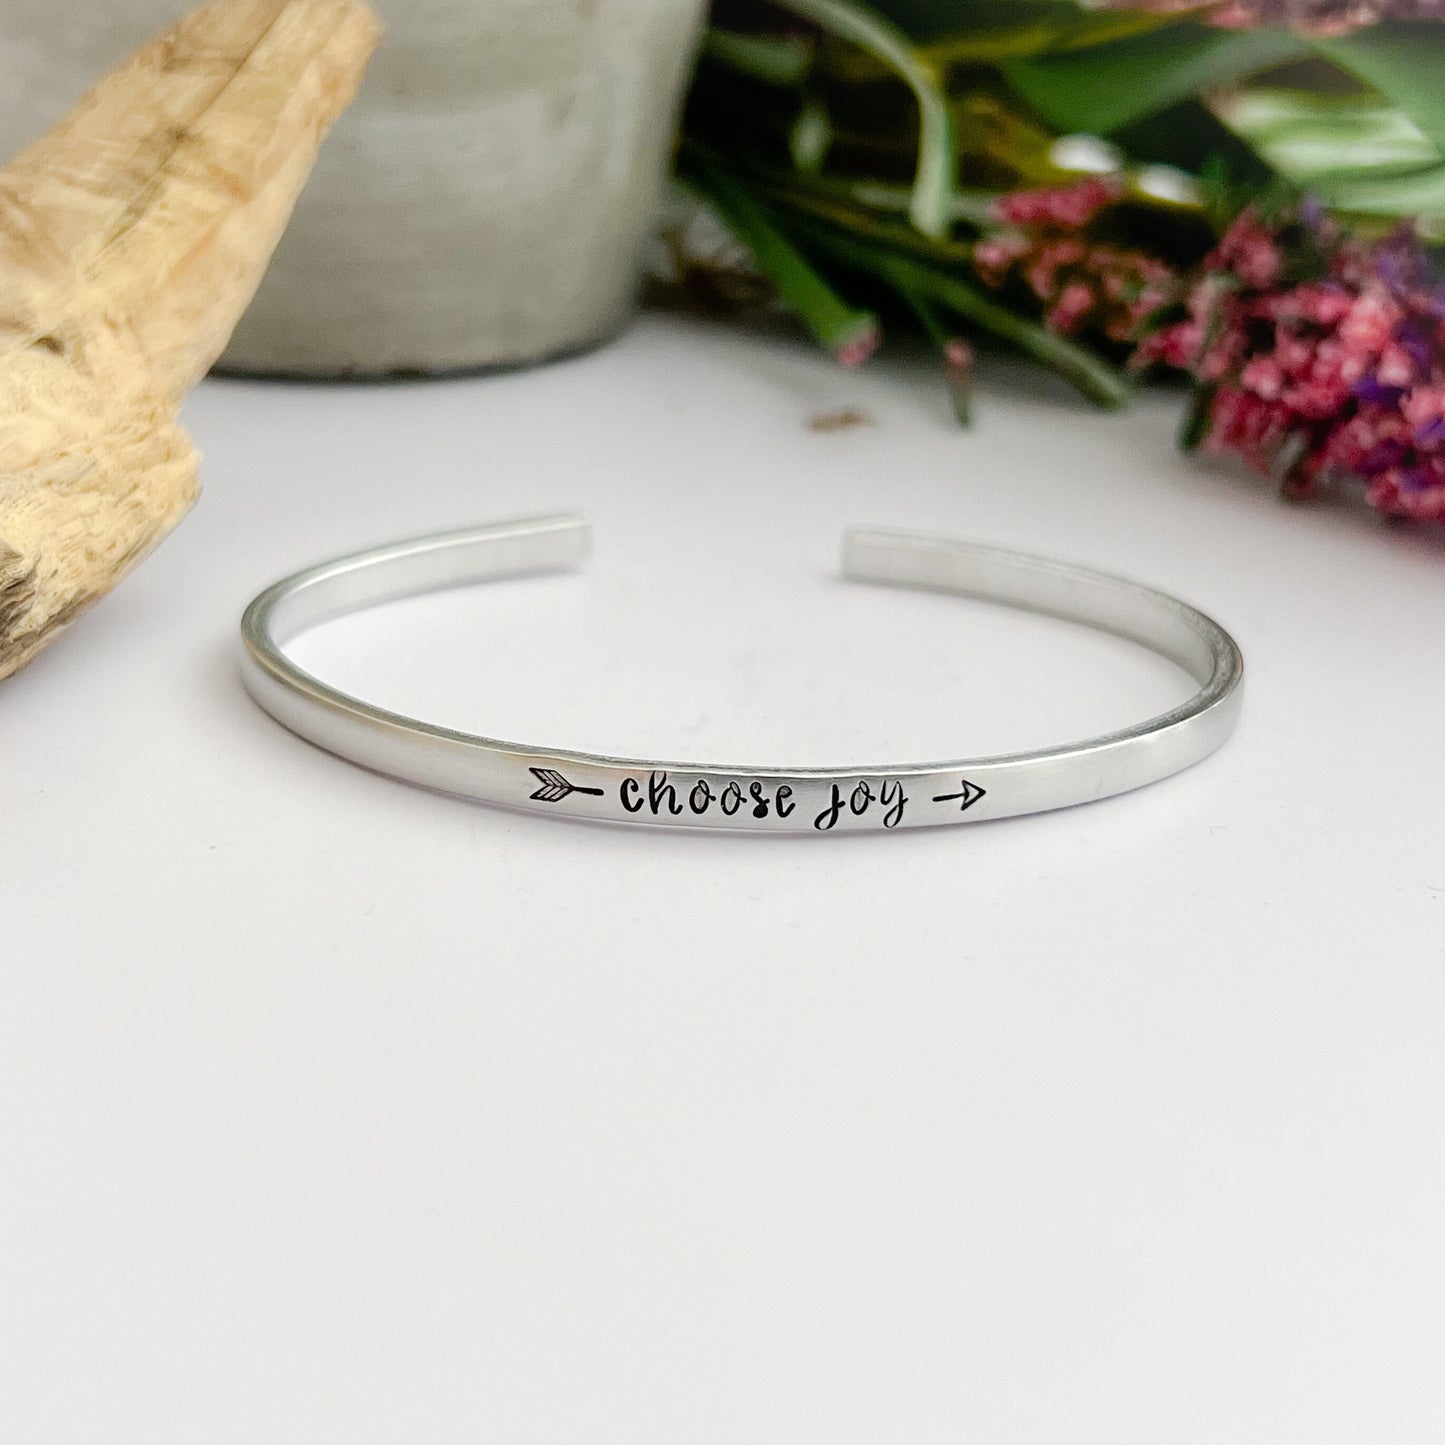 CHOOSE JOY cuff bracelet hand stamped--skinny silver--motivational jewelry--encouragement gift--friend gift--christmas gift